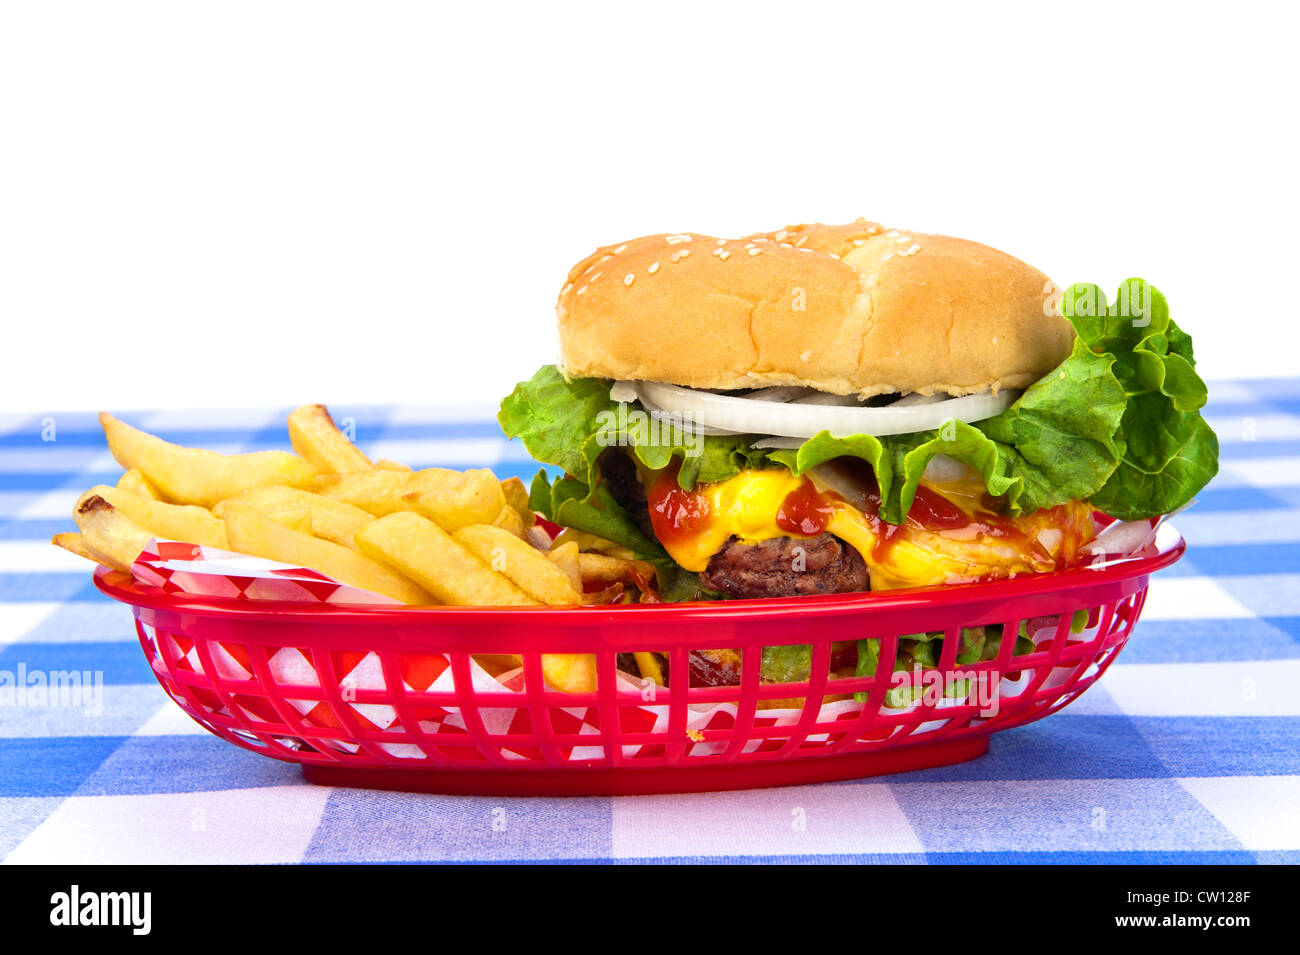 A freshly grilled cheeseburger in a red basket with freshly cooked french fries. Stock Photo